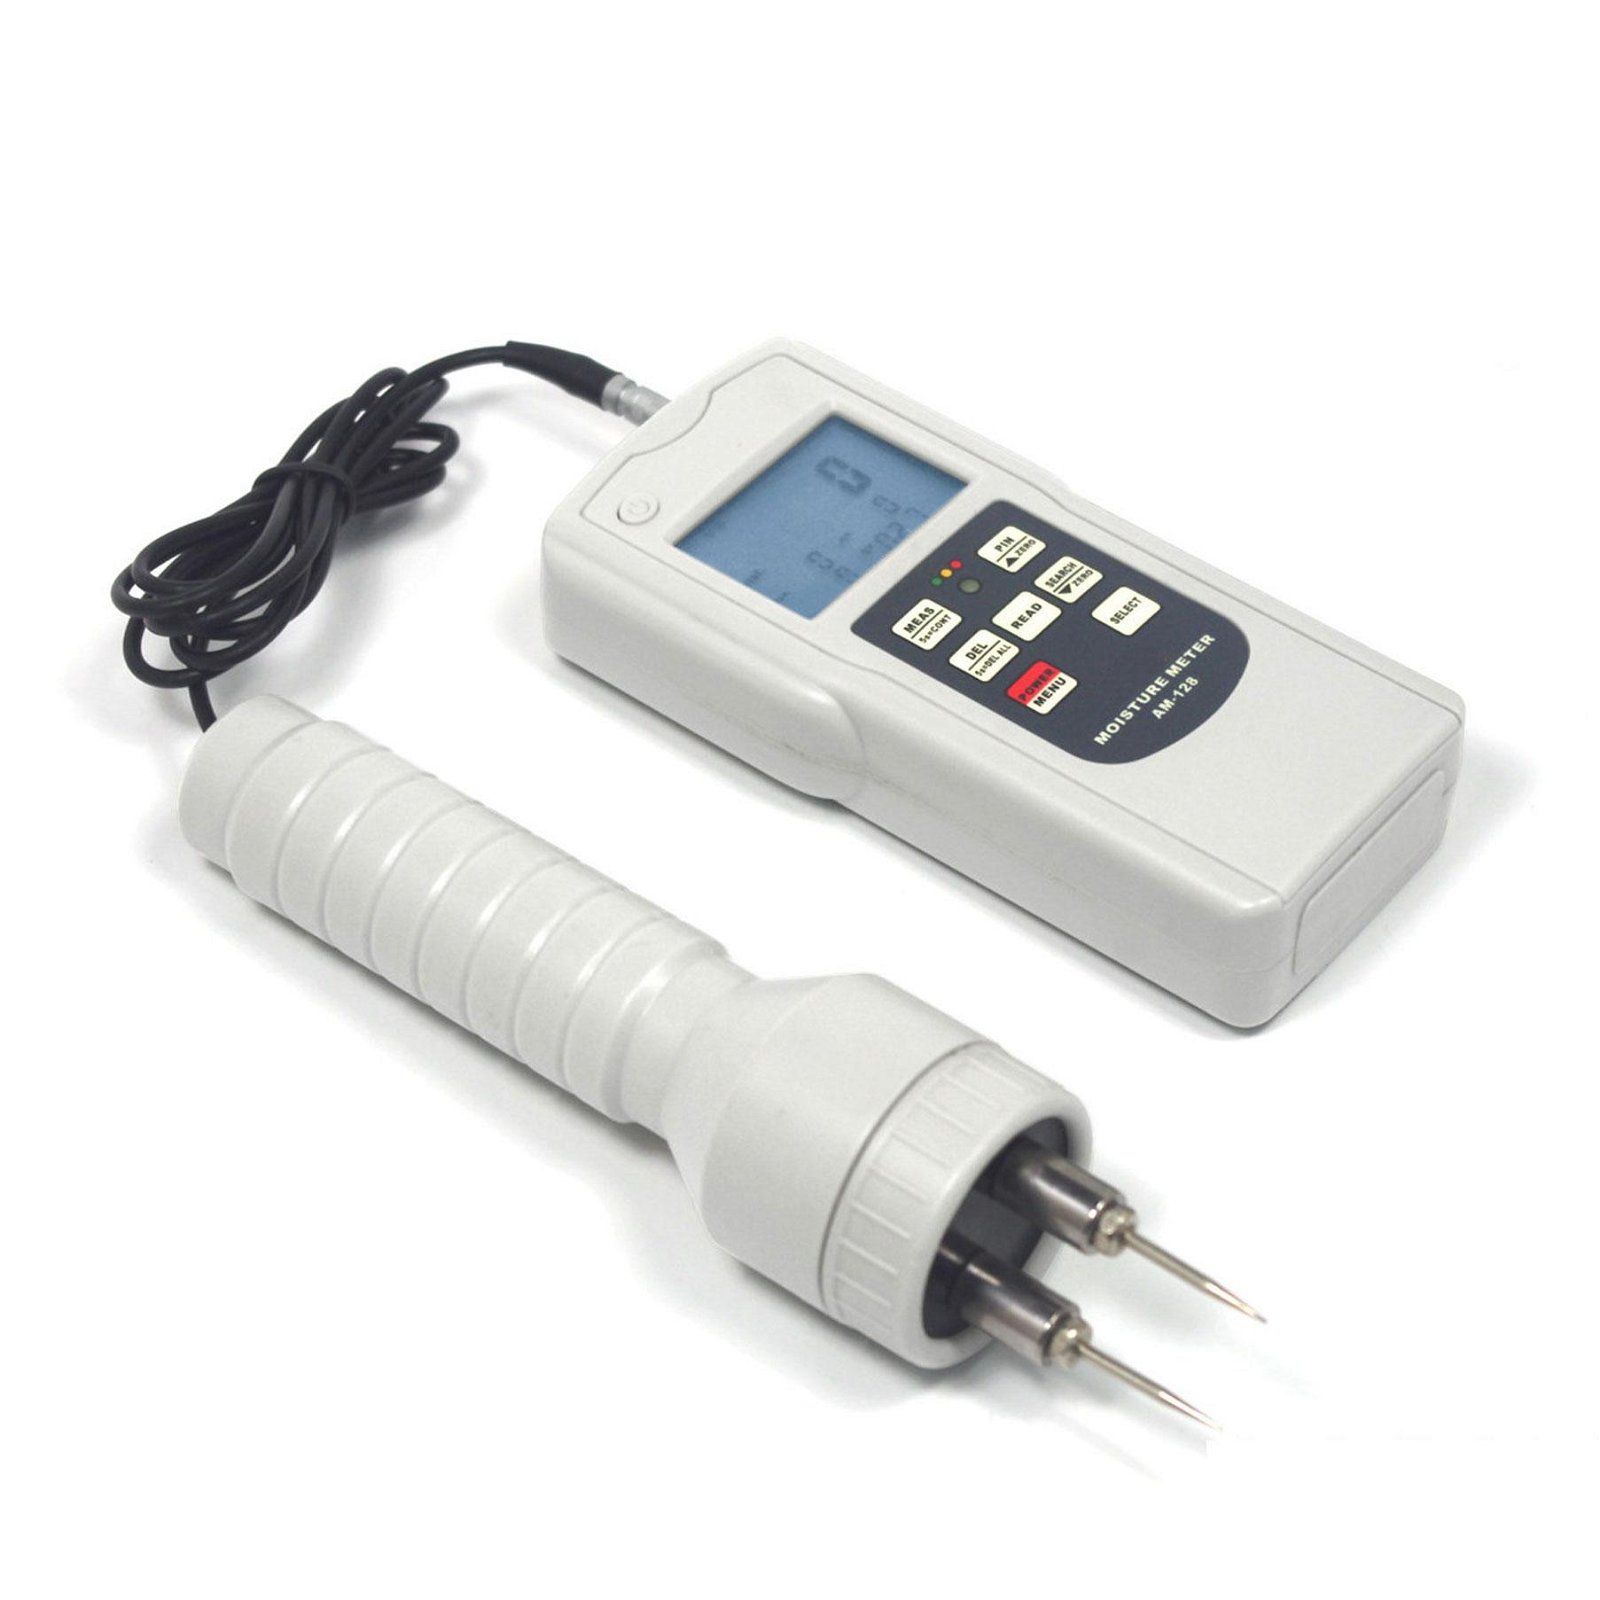 Multifunction Moisture Meter With Two measurement modes: Search Type & Pin Type 2